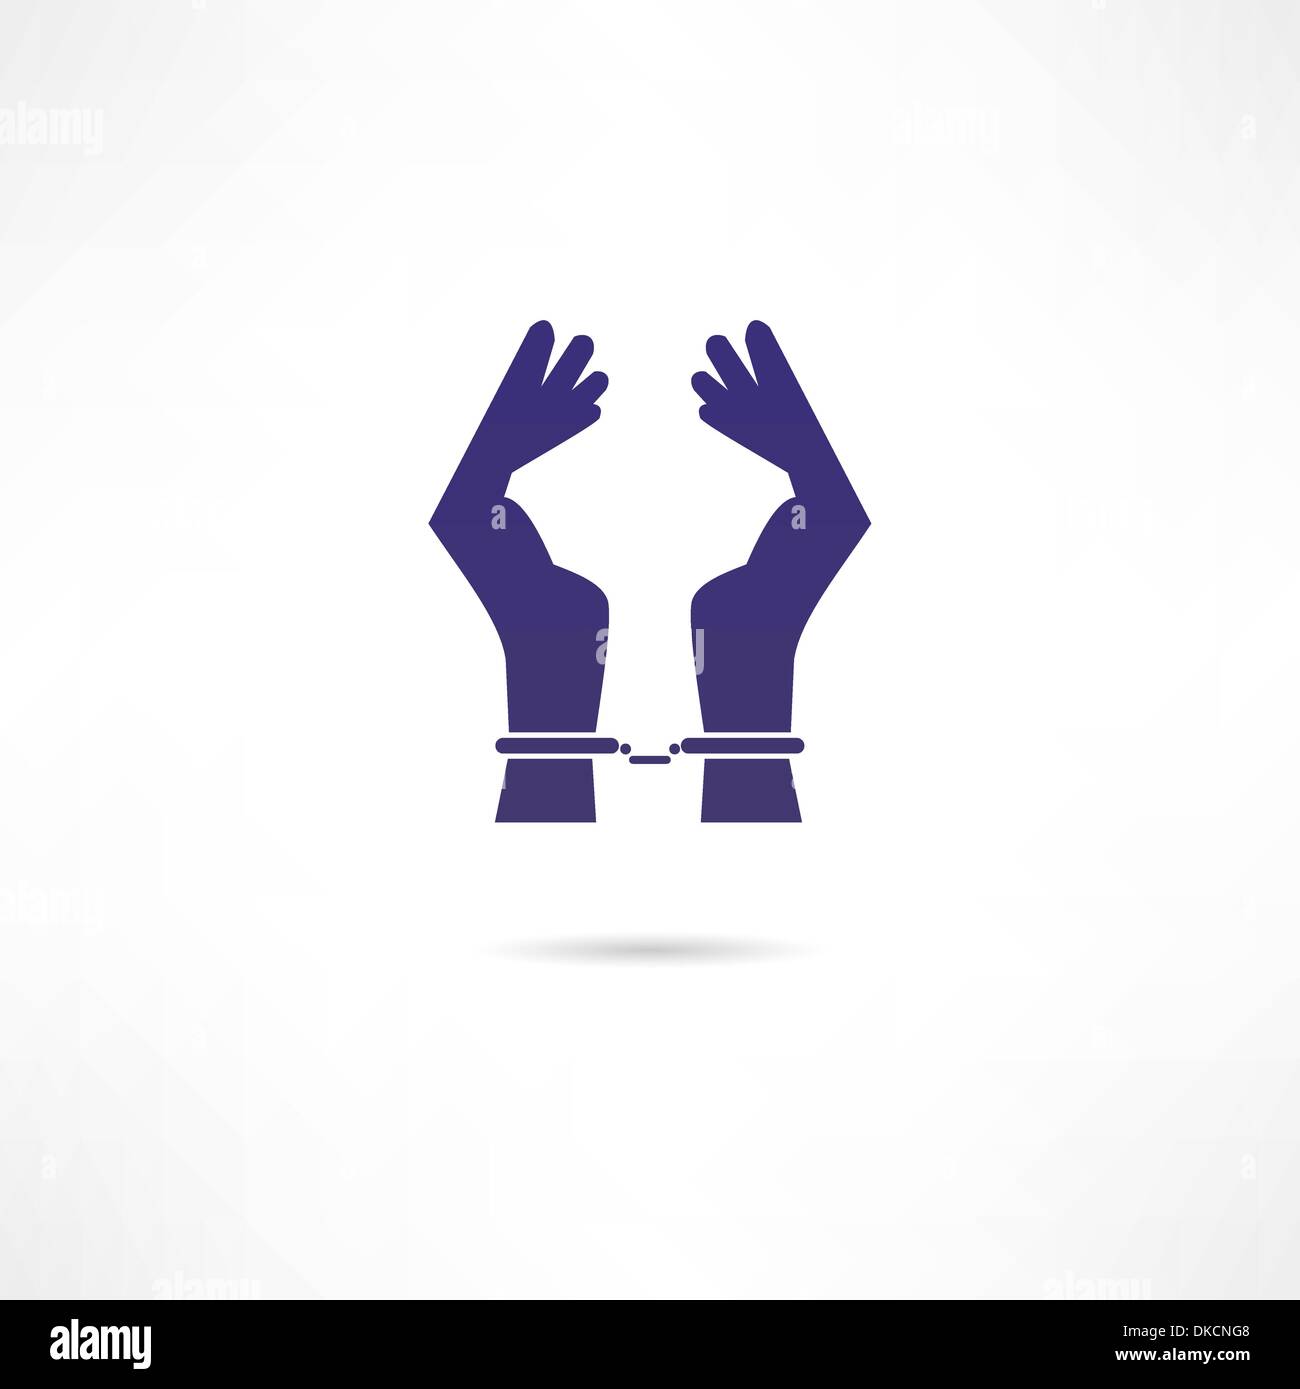 Hands in handcuffs icon Stock Vector